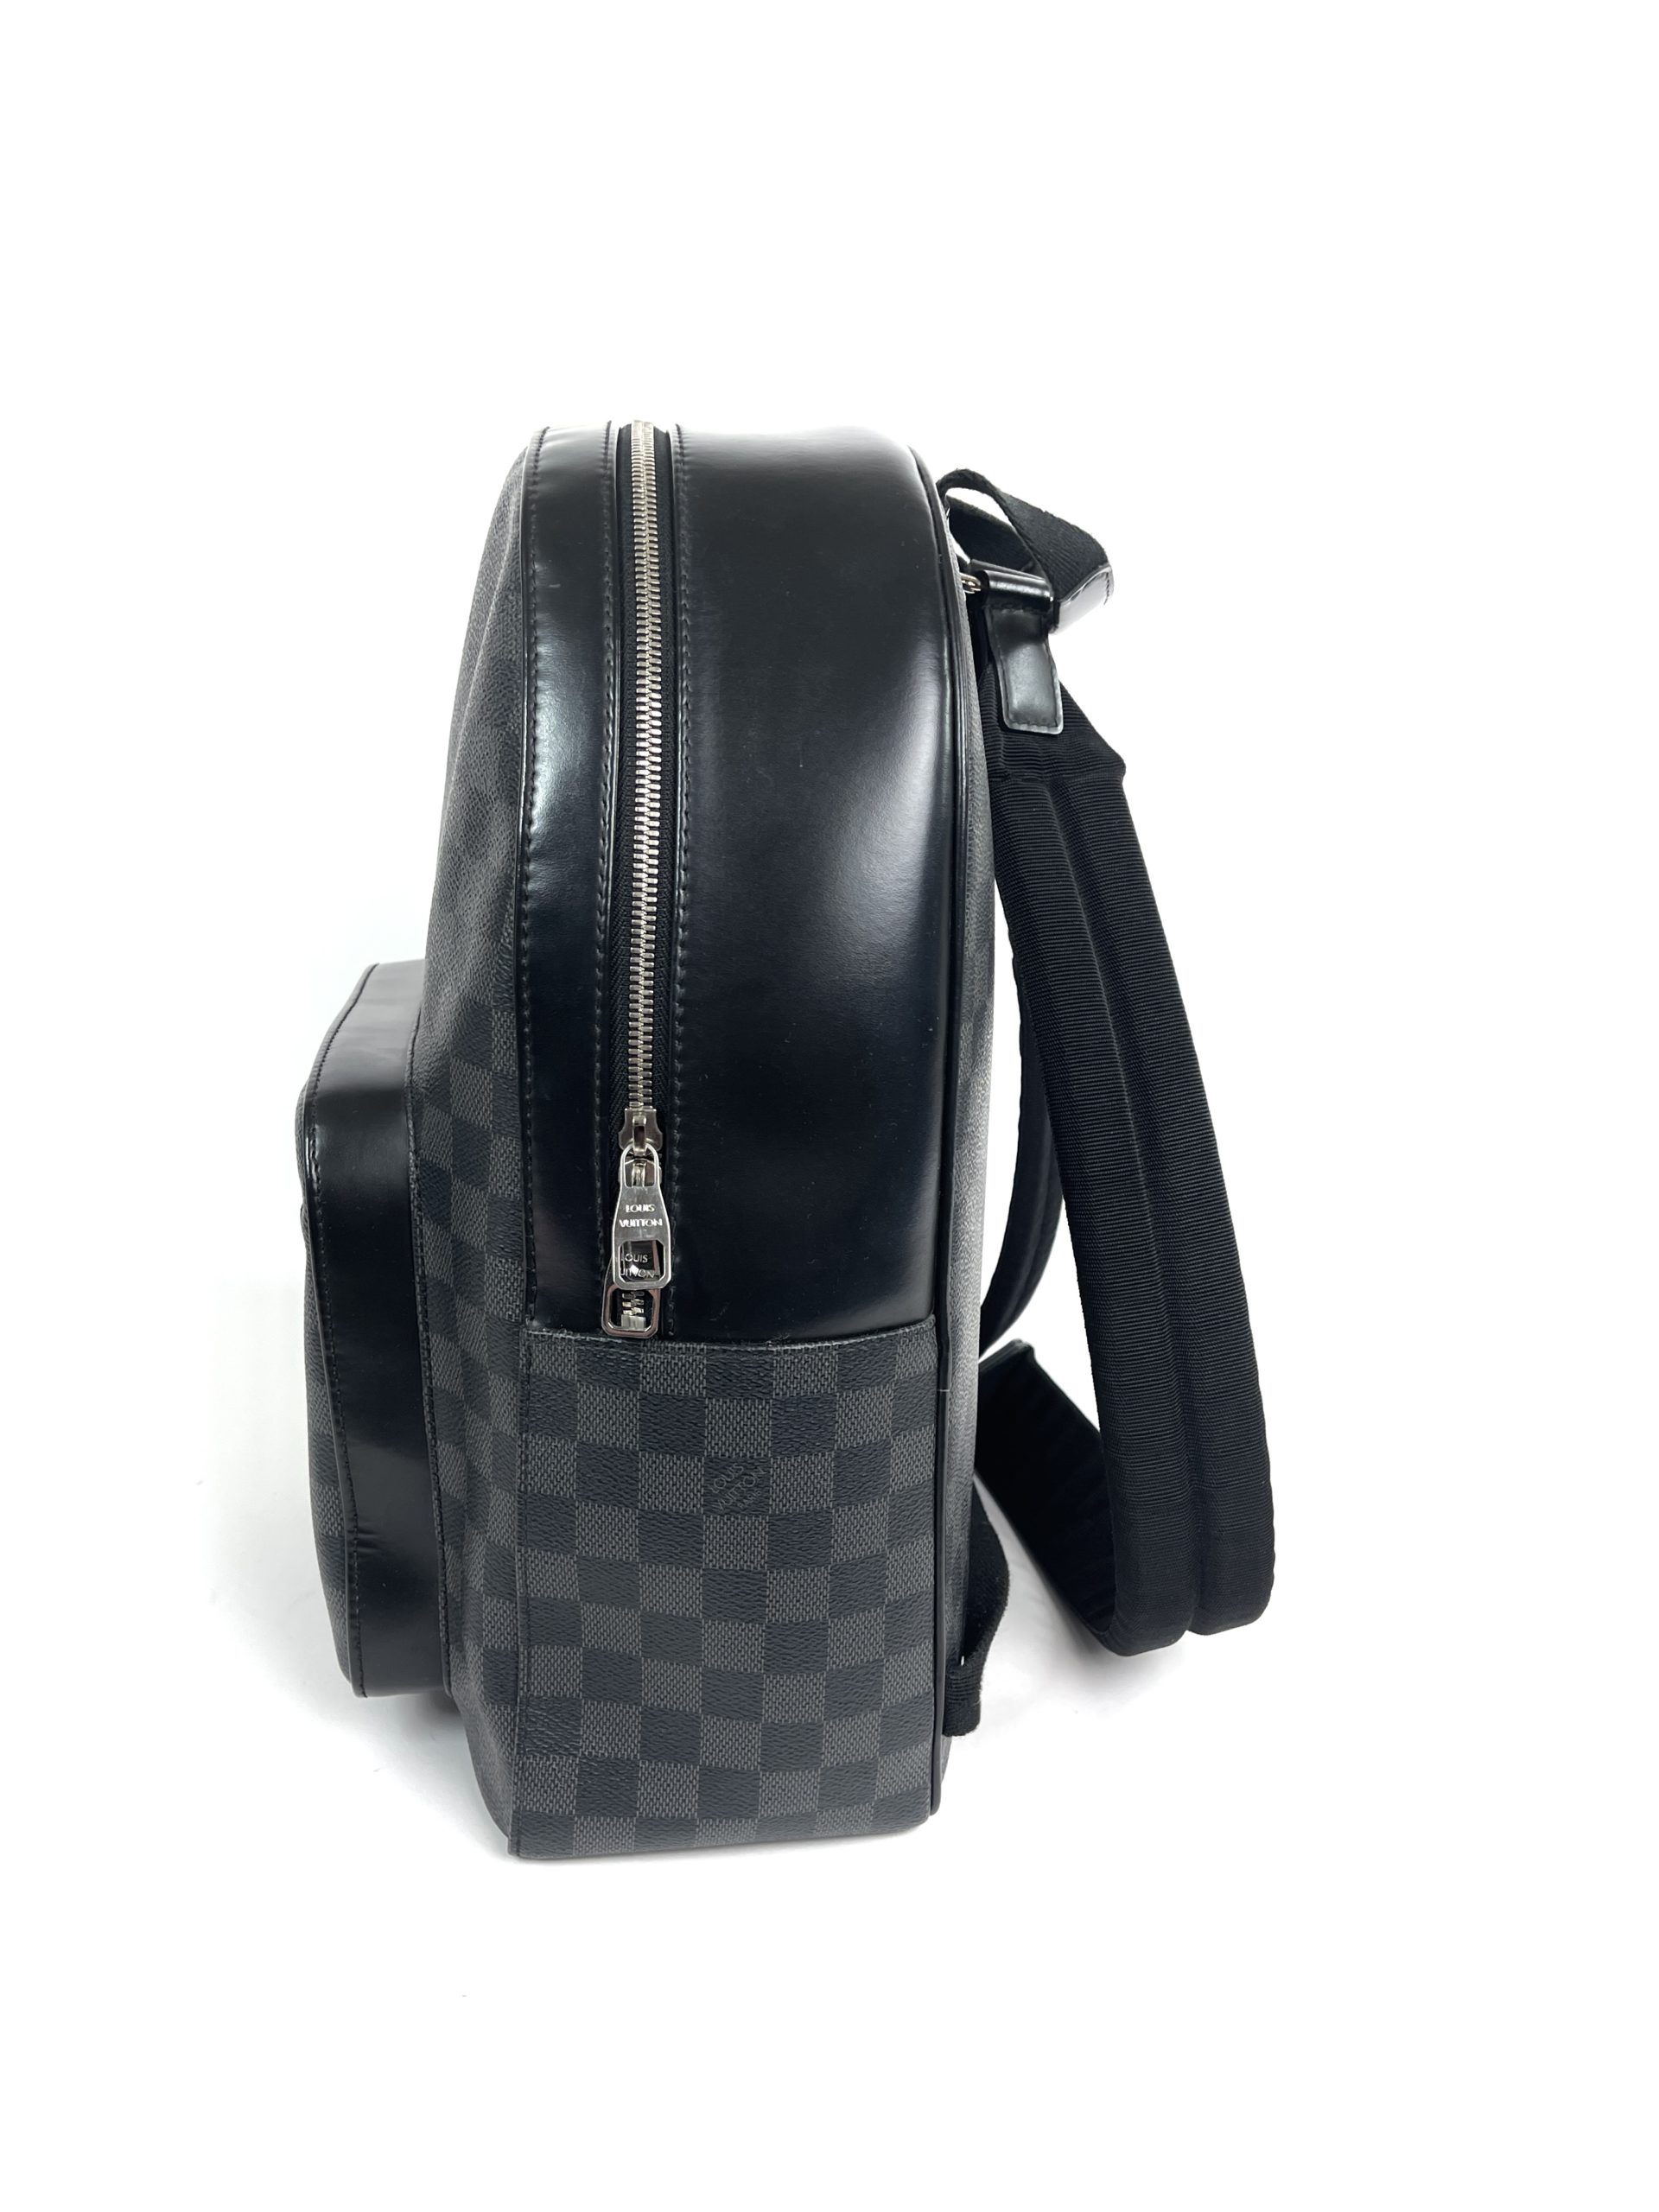 Louis Vuitton Damier Graphite Briefcase Backpack - Grey Backpacks